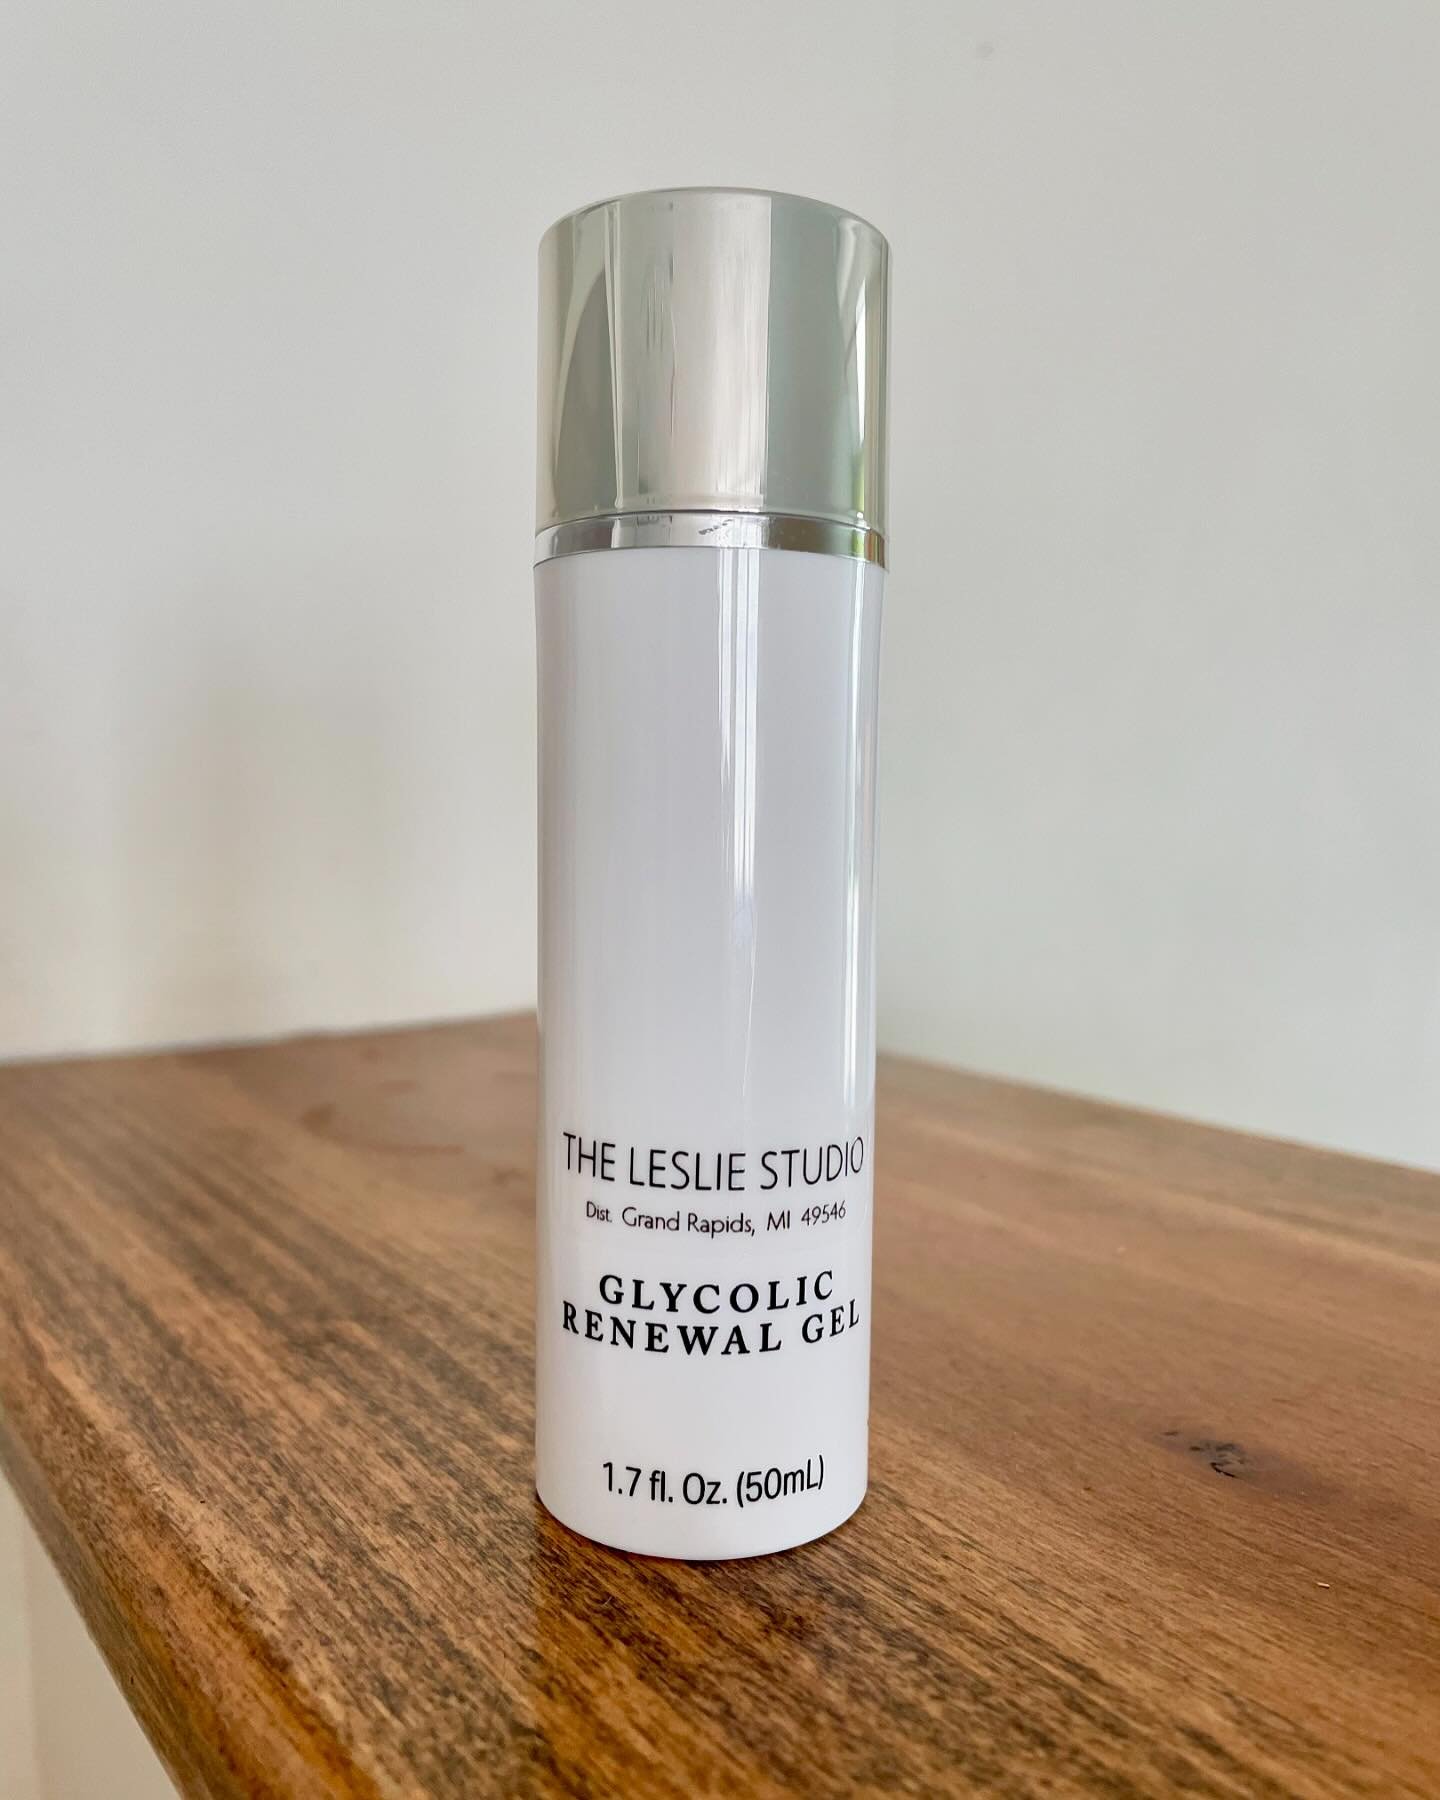 If you notice your skin becomes extra oily and prone to break outs during the summer months- this product is for you! Water based formula with gel-like consistency creates a protective barrier to prevent bacteria on your skin&hellip;keeping acne and 